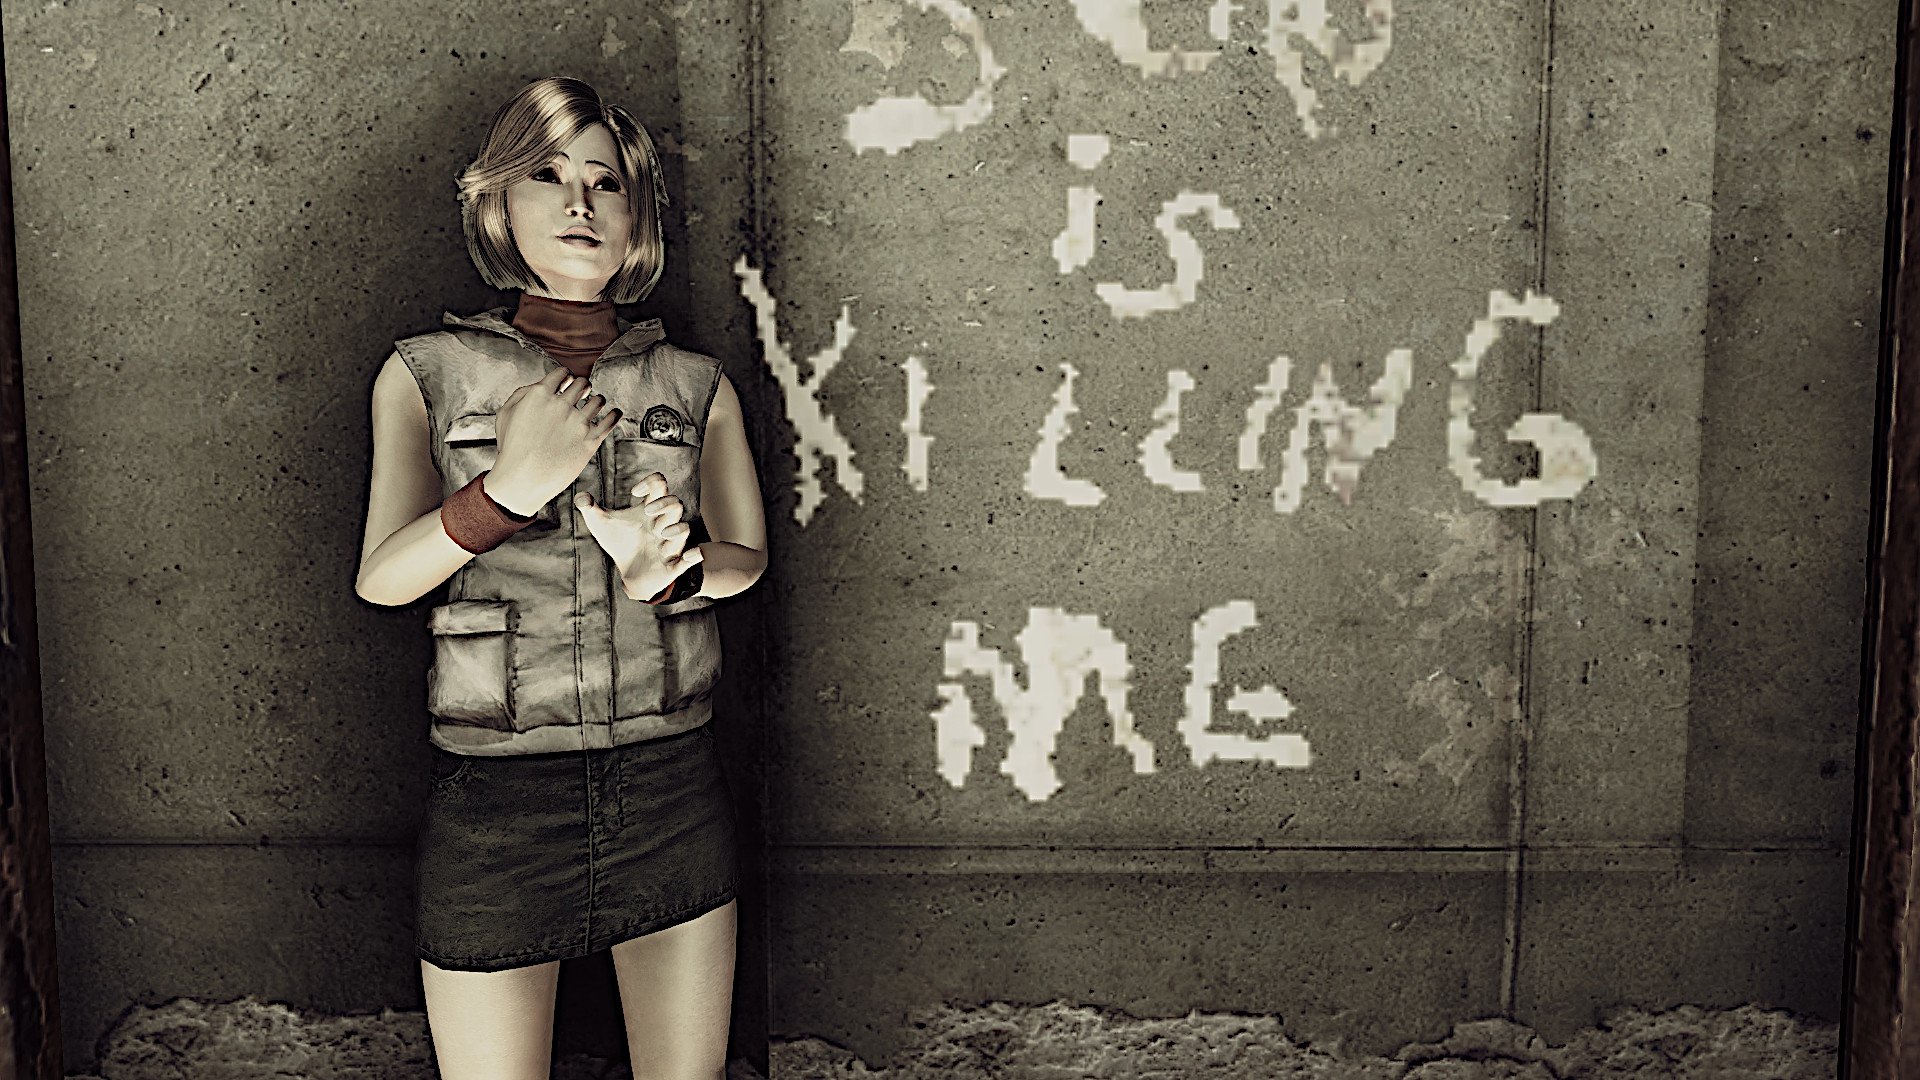 Silent Hill 3 Heather Mason outfit at Fallout New Vegas and community